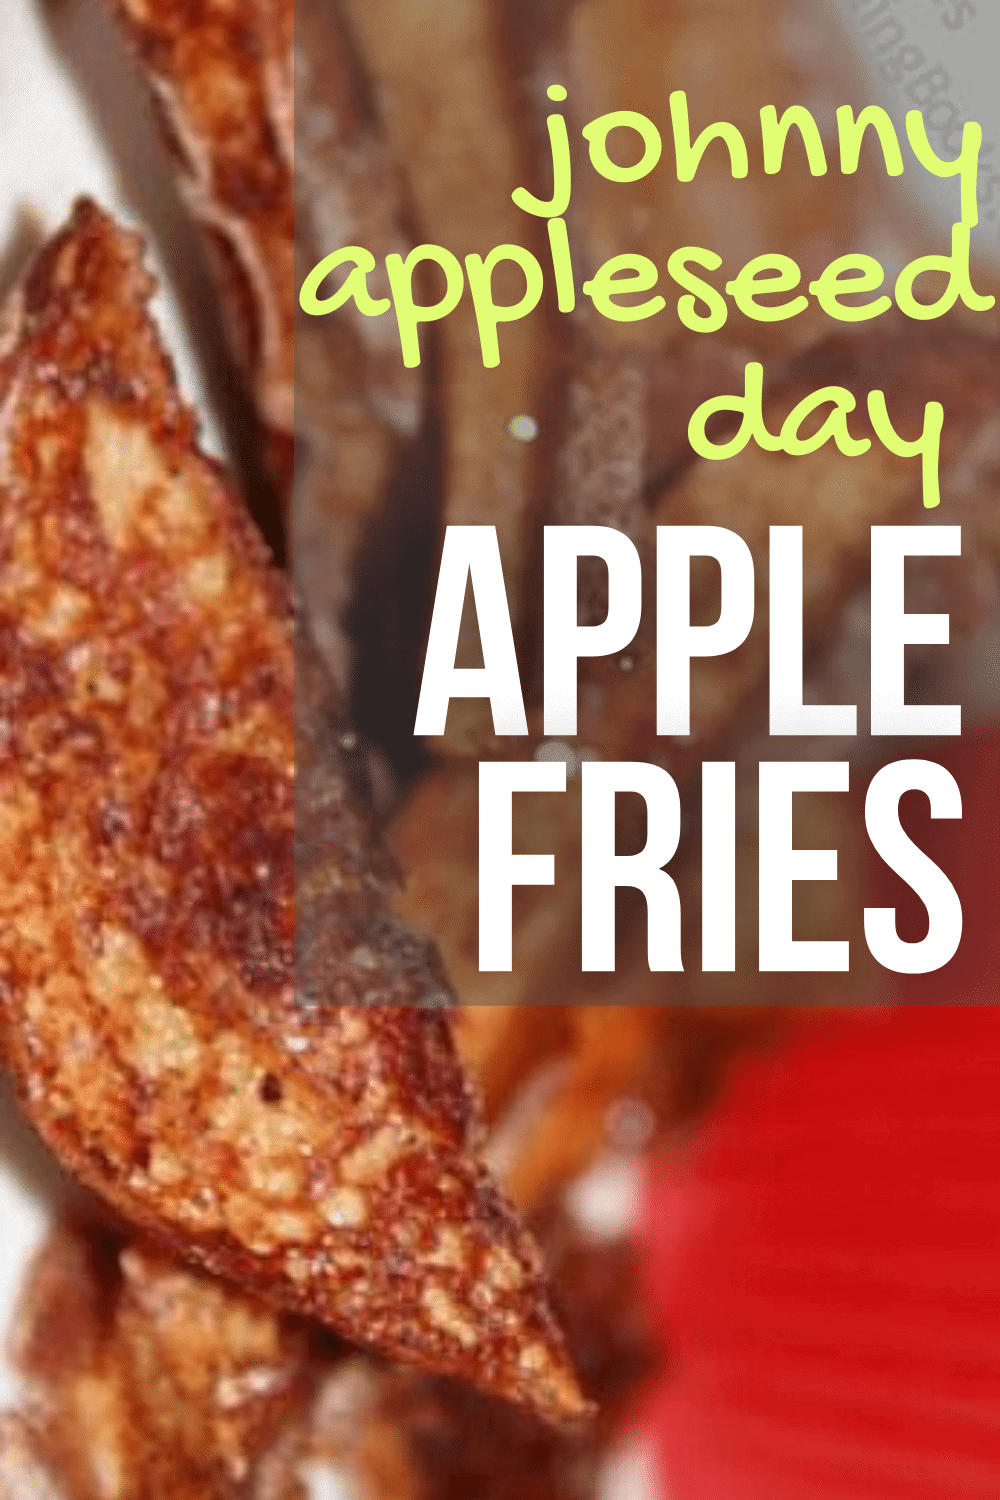 RECIPE AND READ ACTIVITY FOR KIDS JOHNNY APPLESEED DAY ACTIVITIES text over fried apple sticks